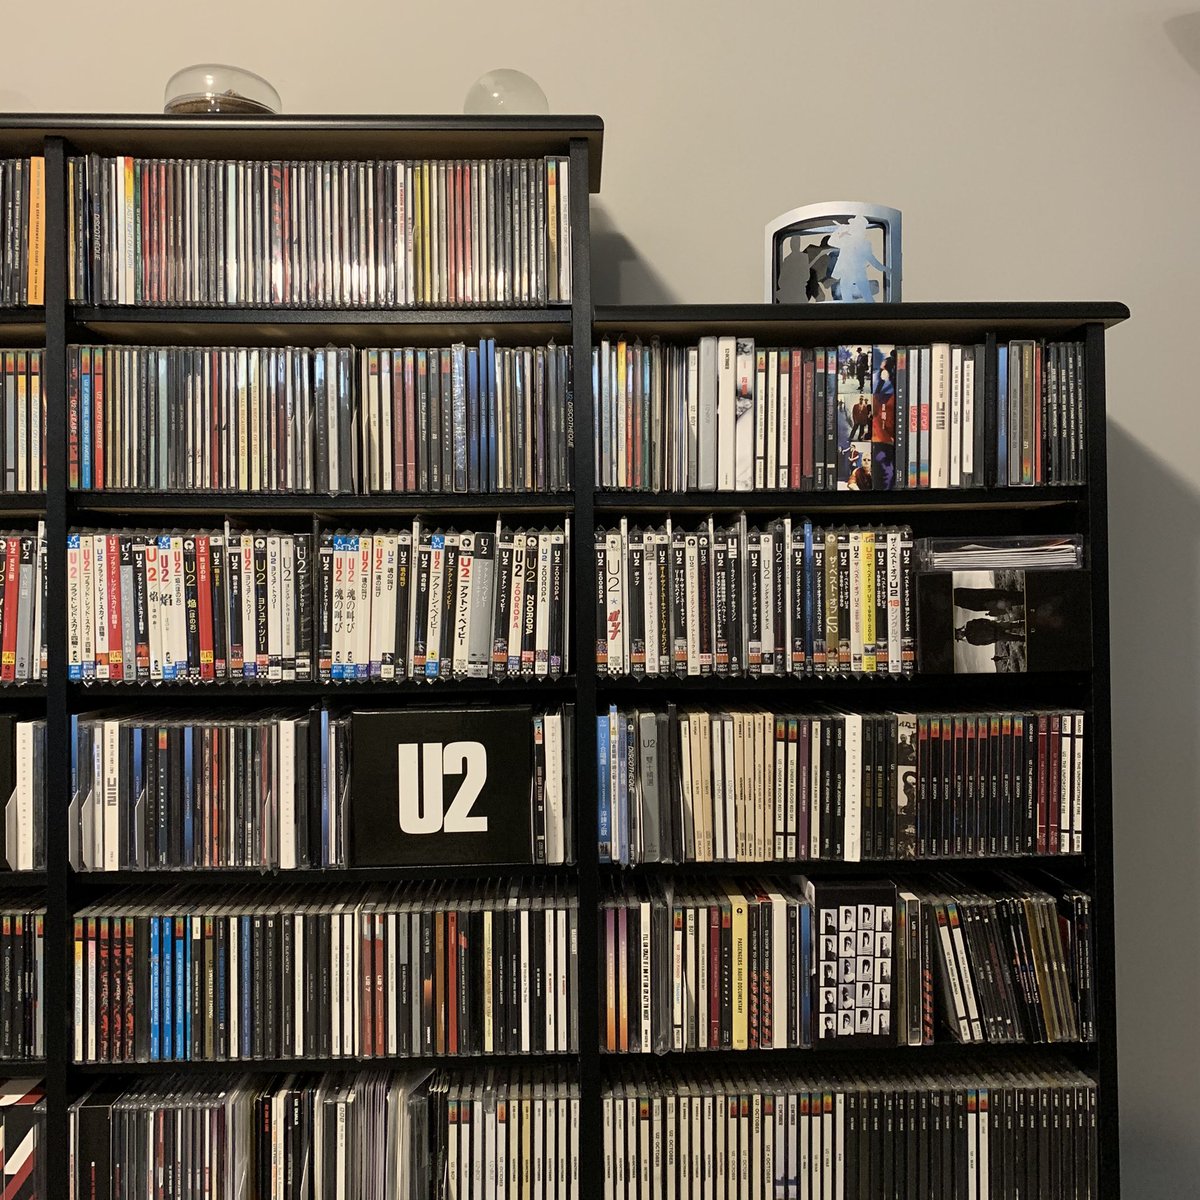 Photo 8: CDs. Sorted by country, then album or single, then chronologically. On top is a chunk of the paint from Windmill Lane before it was torn down.